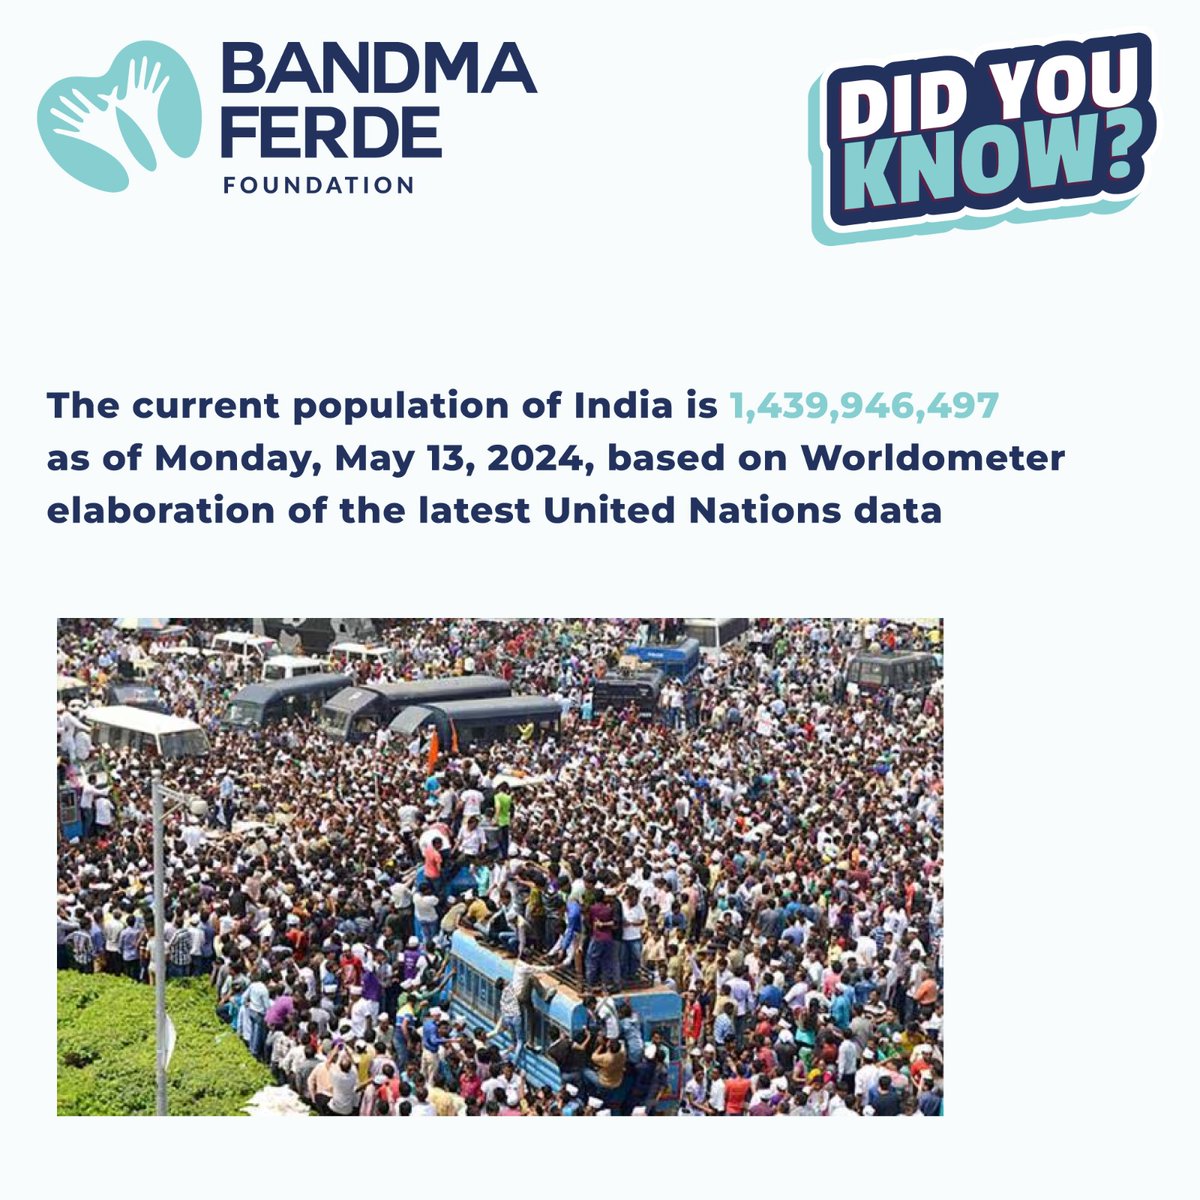 𝐃𝐢𝐝 𝐘𝐨𝐮 𝐊𝐧𝐨𝐰? The current population of India is 1.44 billion as of May 13, 2024, according to Worldometer and UN data. For more information visit the link: linktr.ee/Bandmaferdefou… #Bandmaferdefoundation #Bandmaferde #NGOIndia #nonprofitorganizatonindelhi